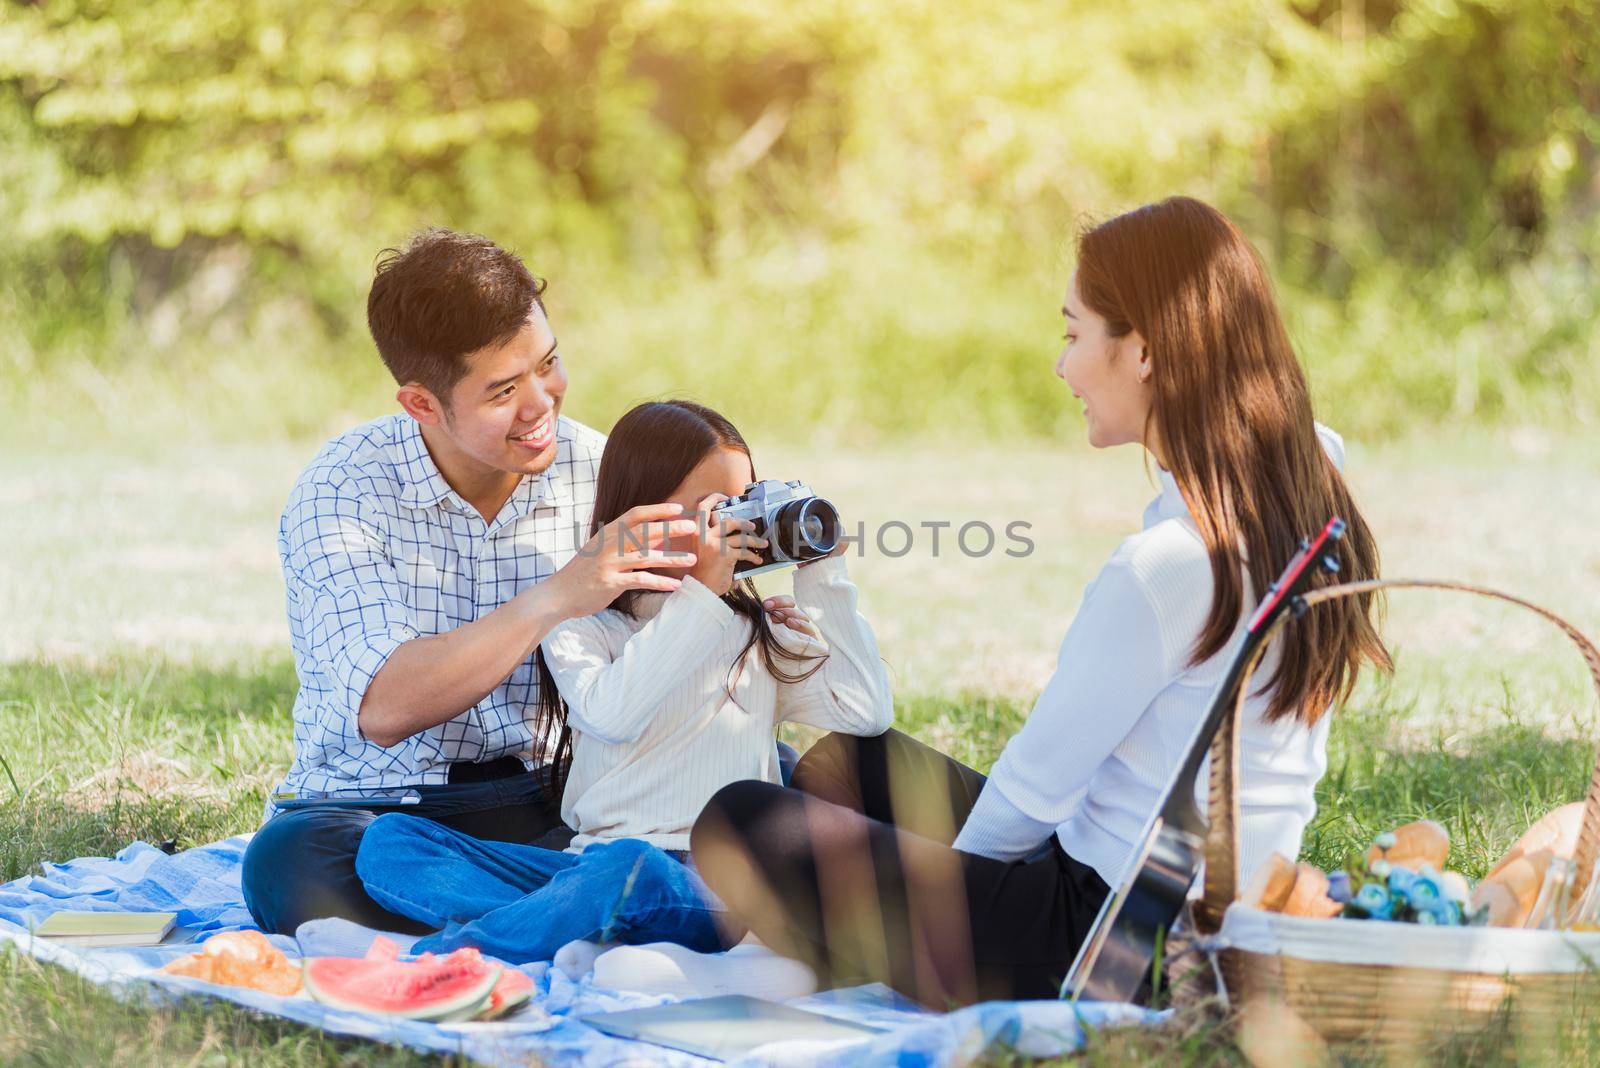 Happy Asian young family father, mother and child little girl having fun and enjoying outdoor picnic together sitting on picnic blanket shooting photos by retro camera in the garden park on sunny day